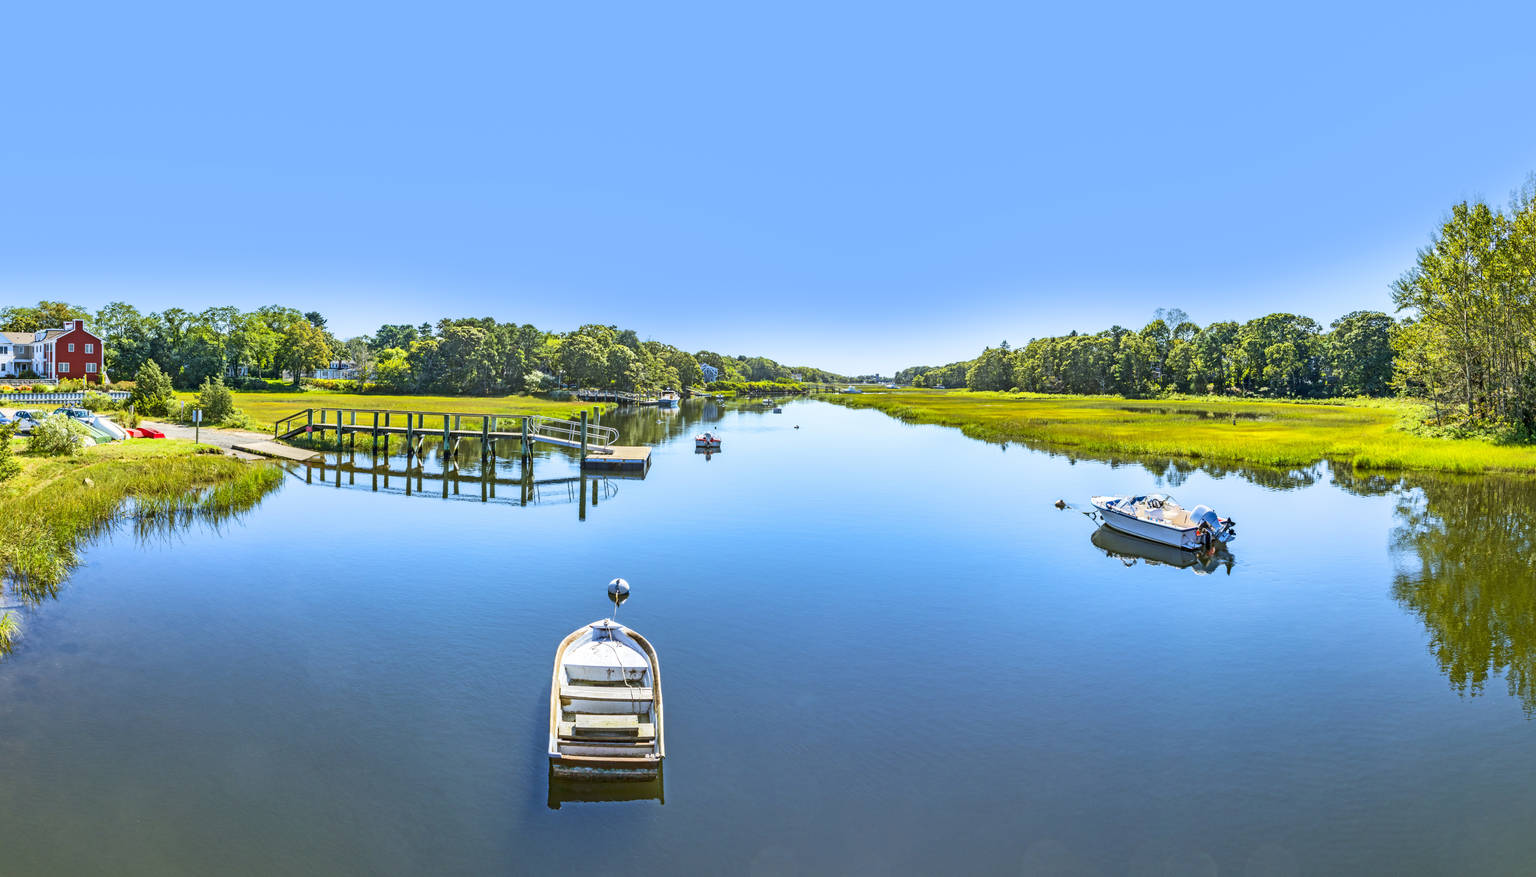 Harwich, Massachusetts Vacation Rentals: Condos, Cabins & Houses